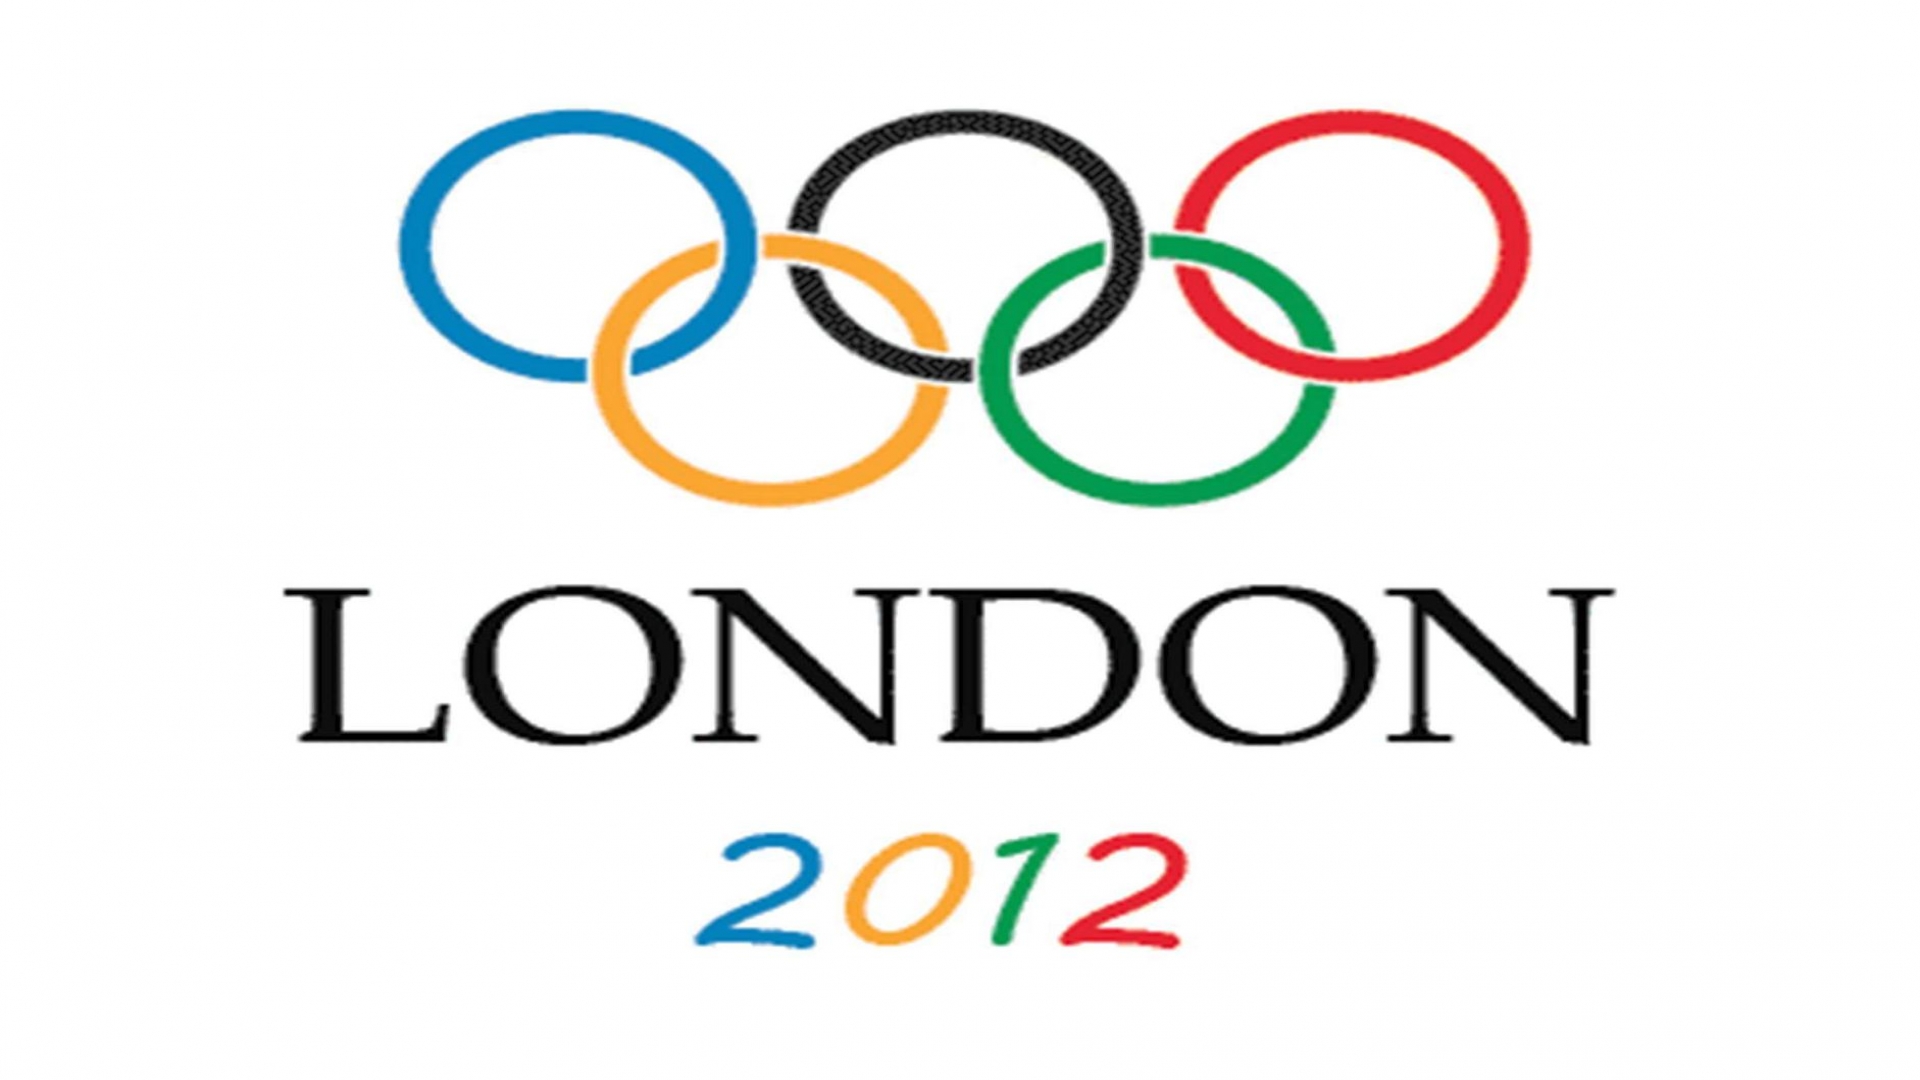 olympic rings clip art - photo #36